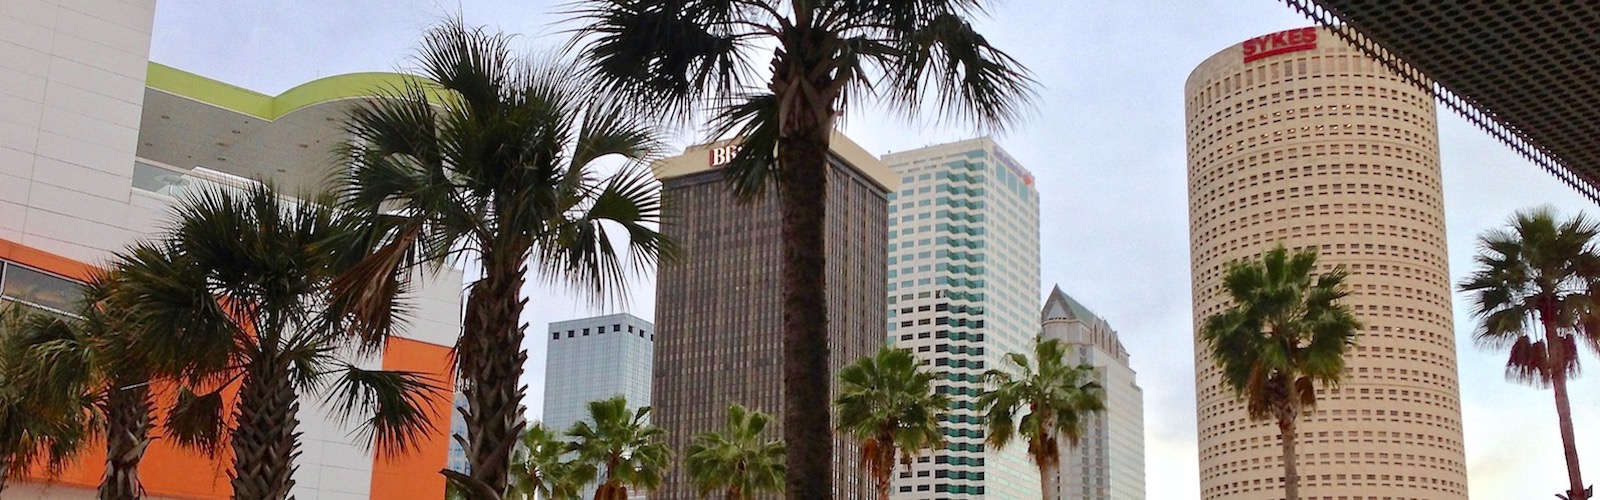 Downtown Tampa as seen from the The Tampa Riverwalk at Curtis Hixon Park.